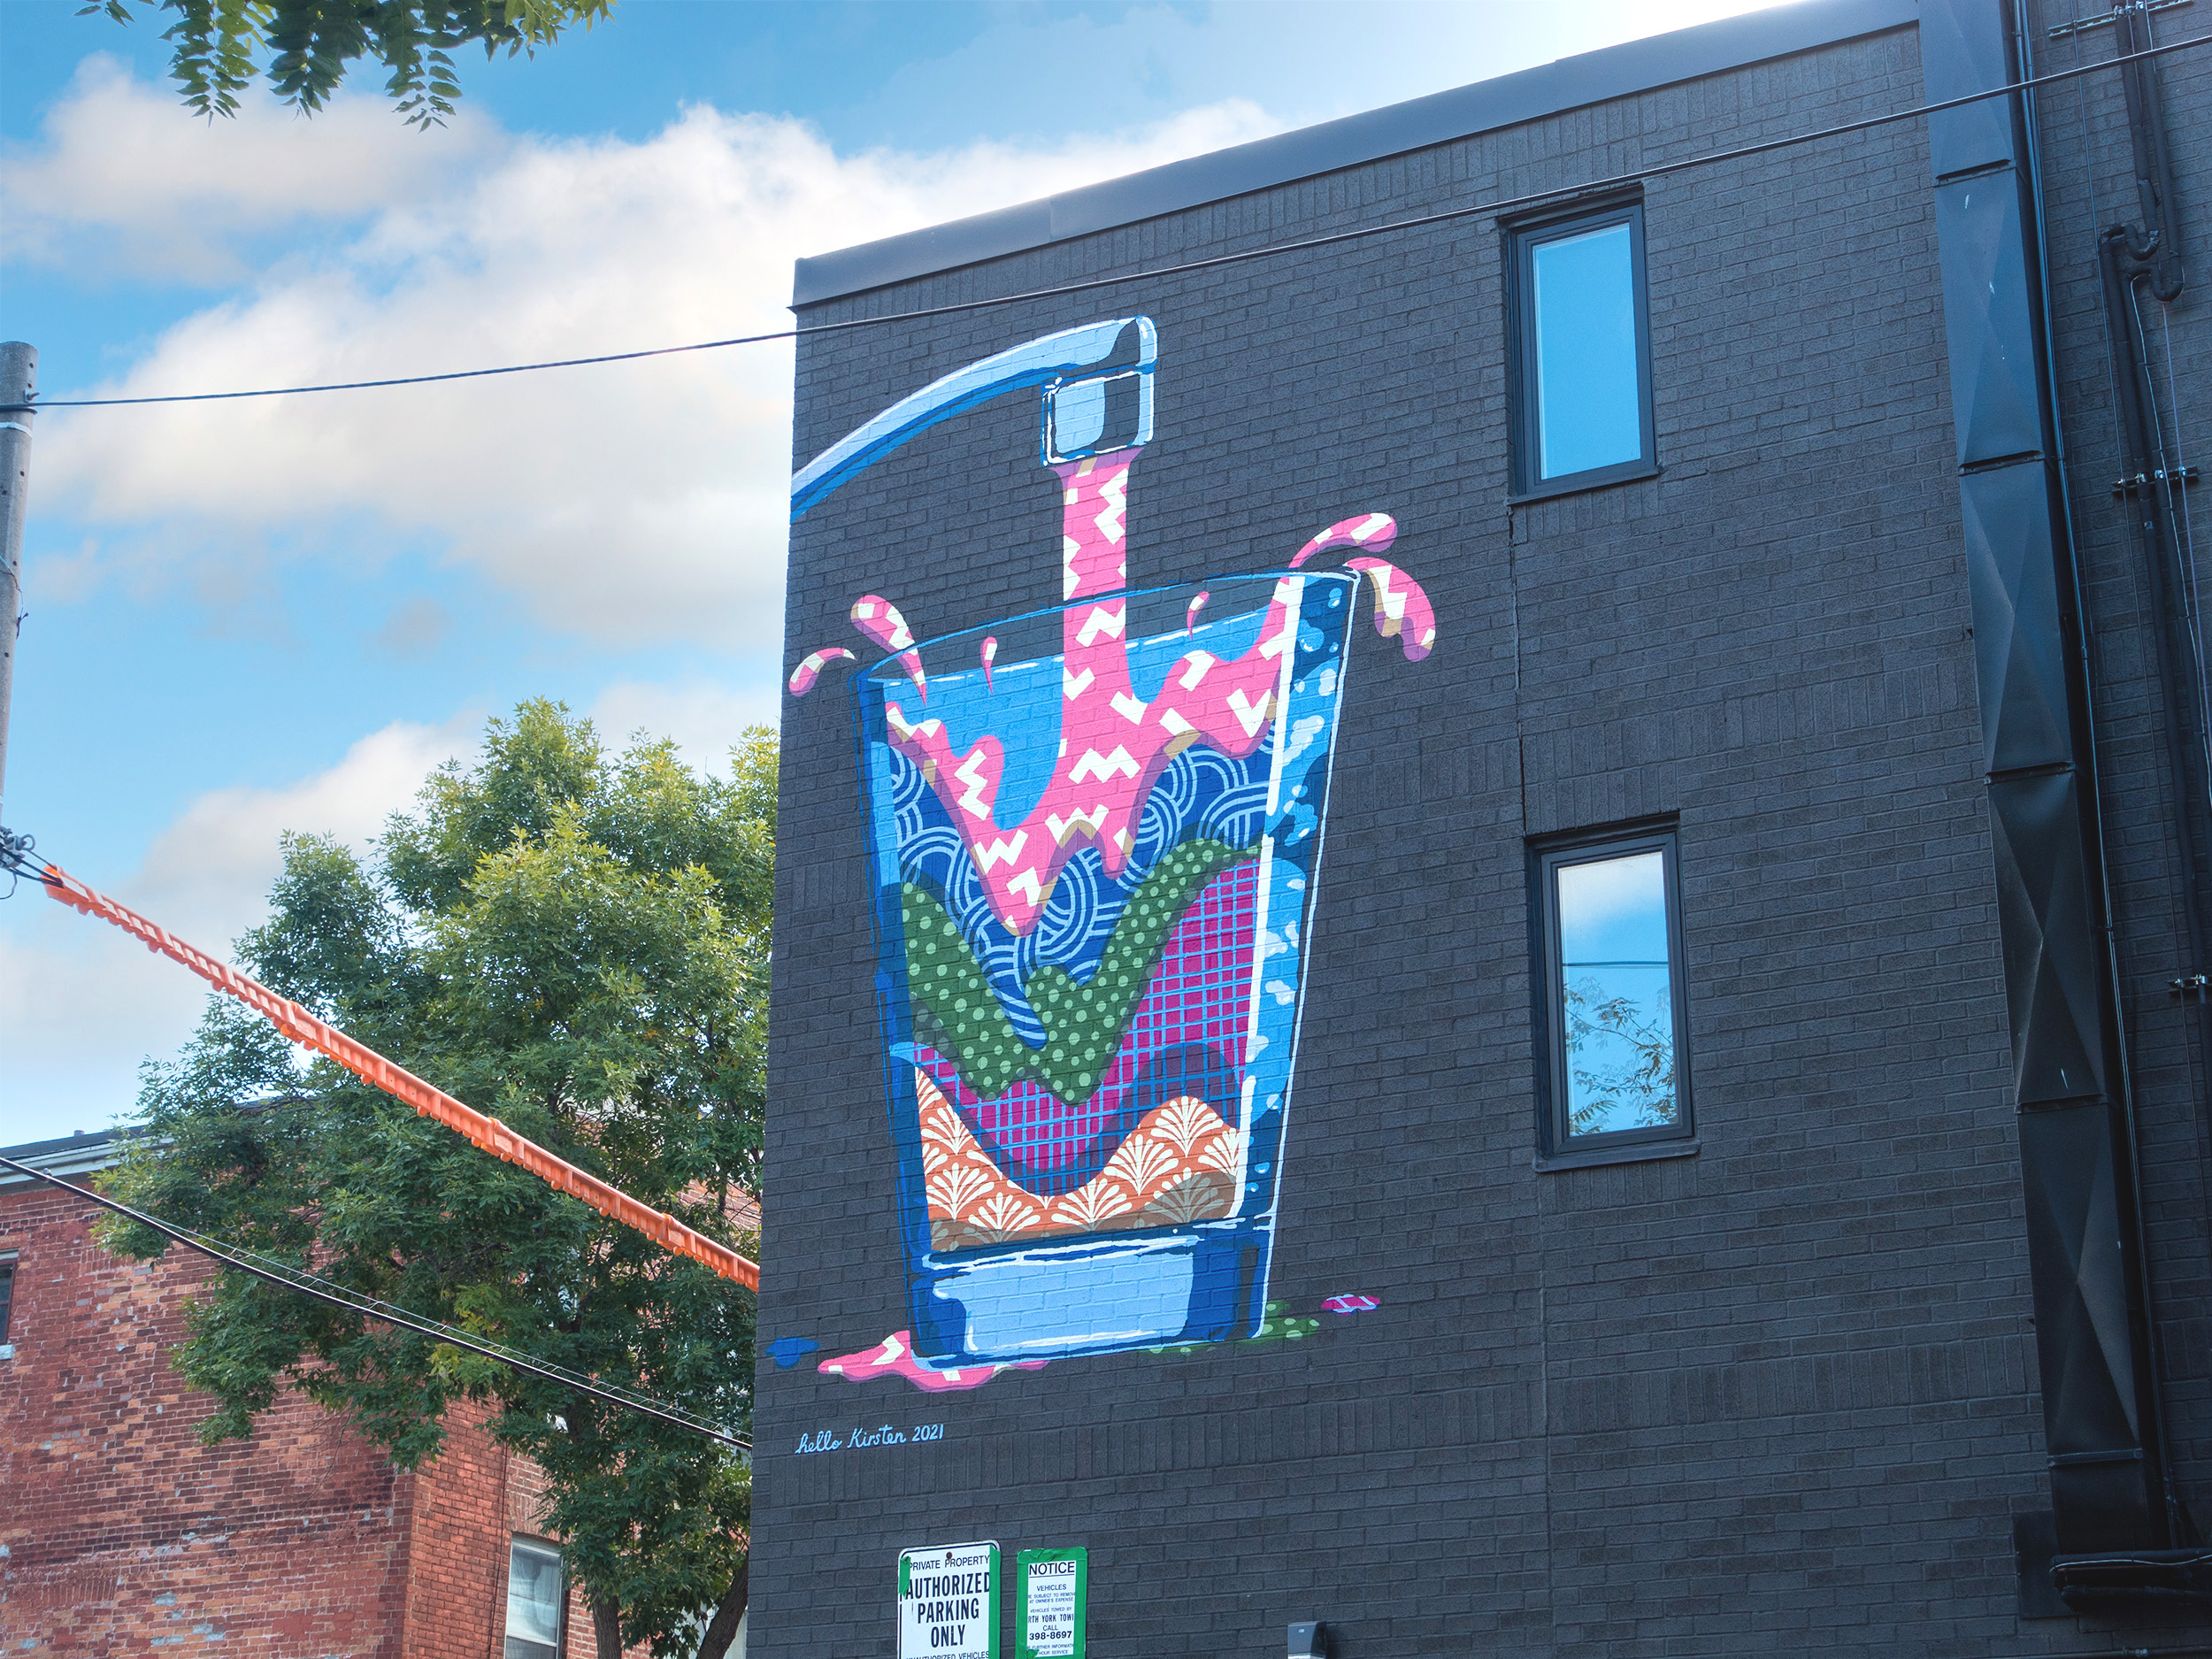 outdoor mural on the side of building showing a tap pouring colourful liquid into a glass